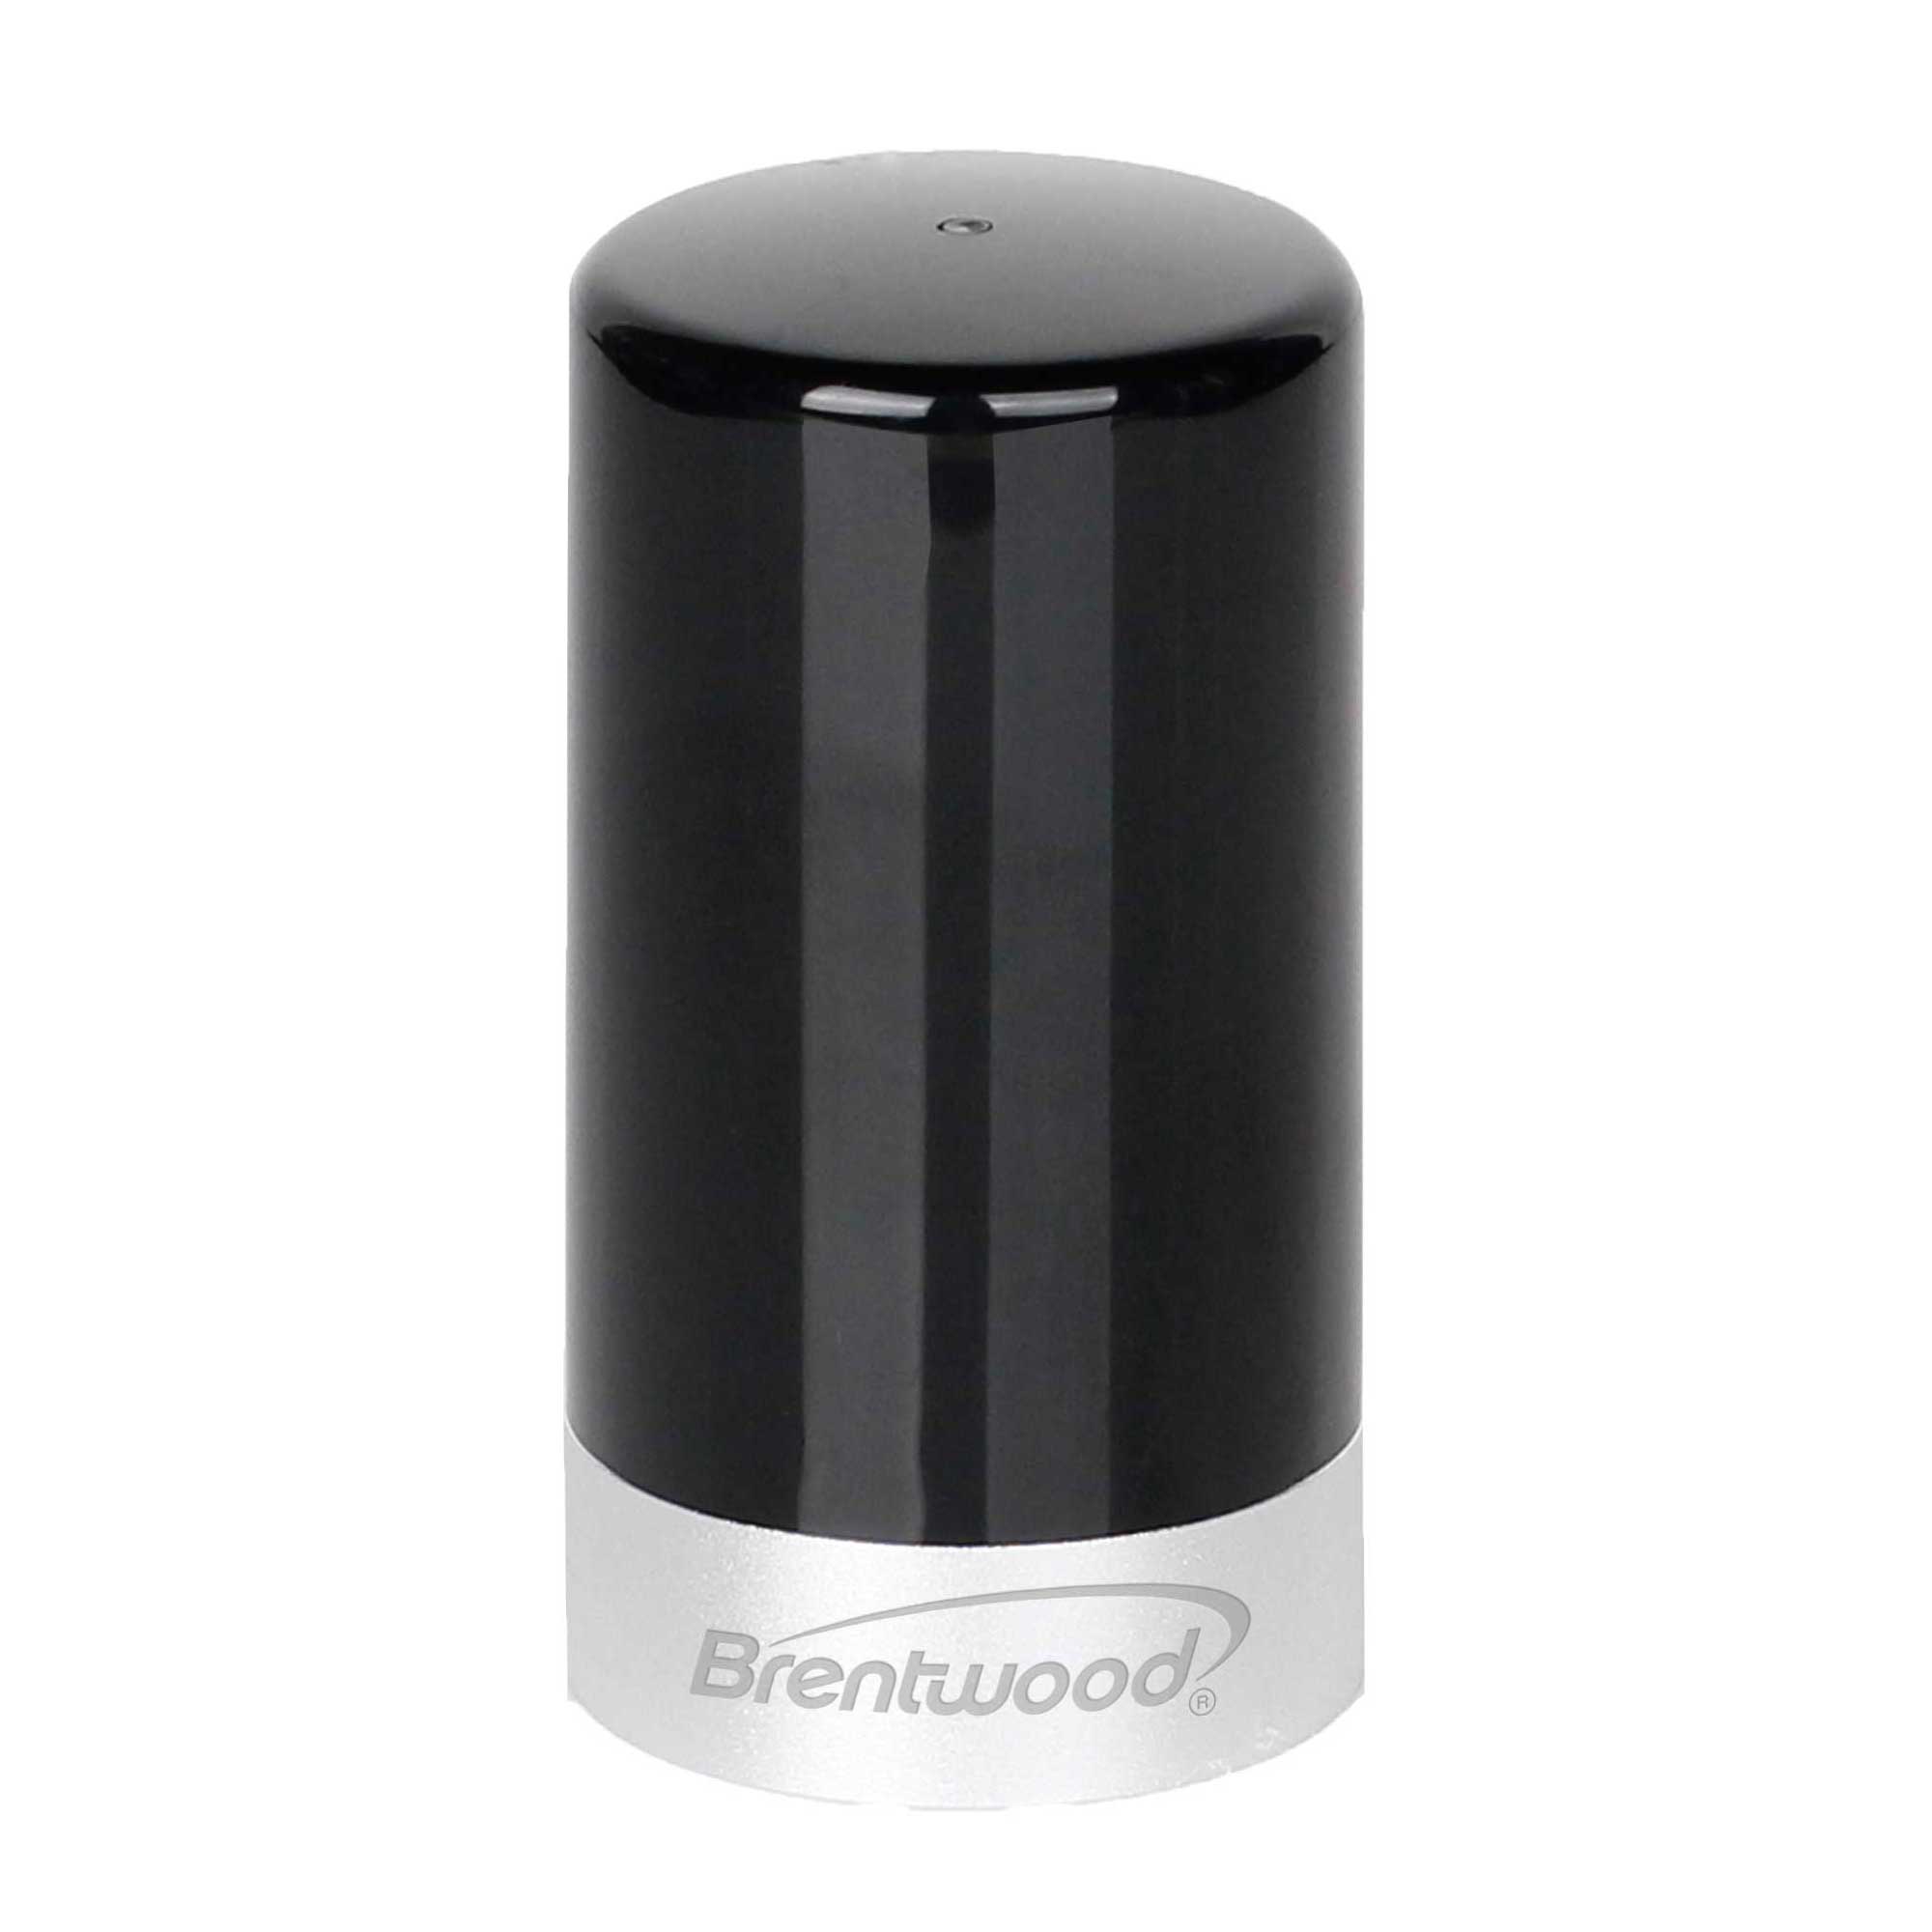 Brentwood WA-2000BK Portable Automatic Vacuum Wine Preserver and Bottle Stopper, Black